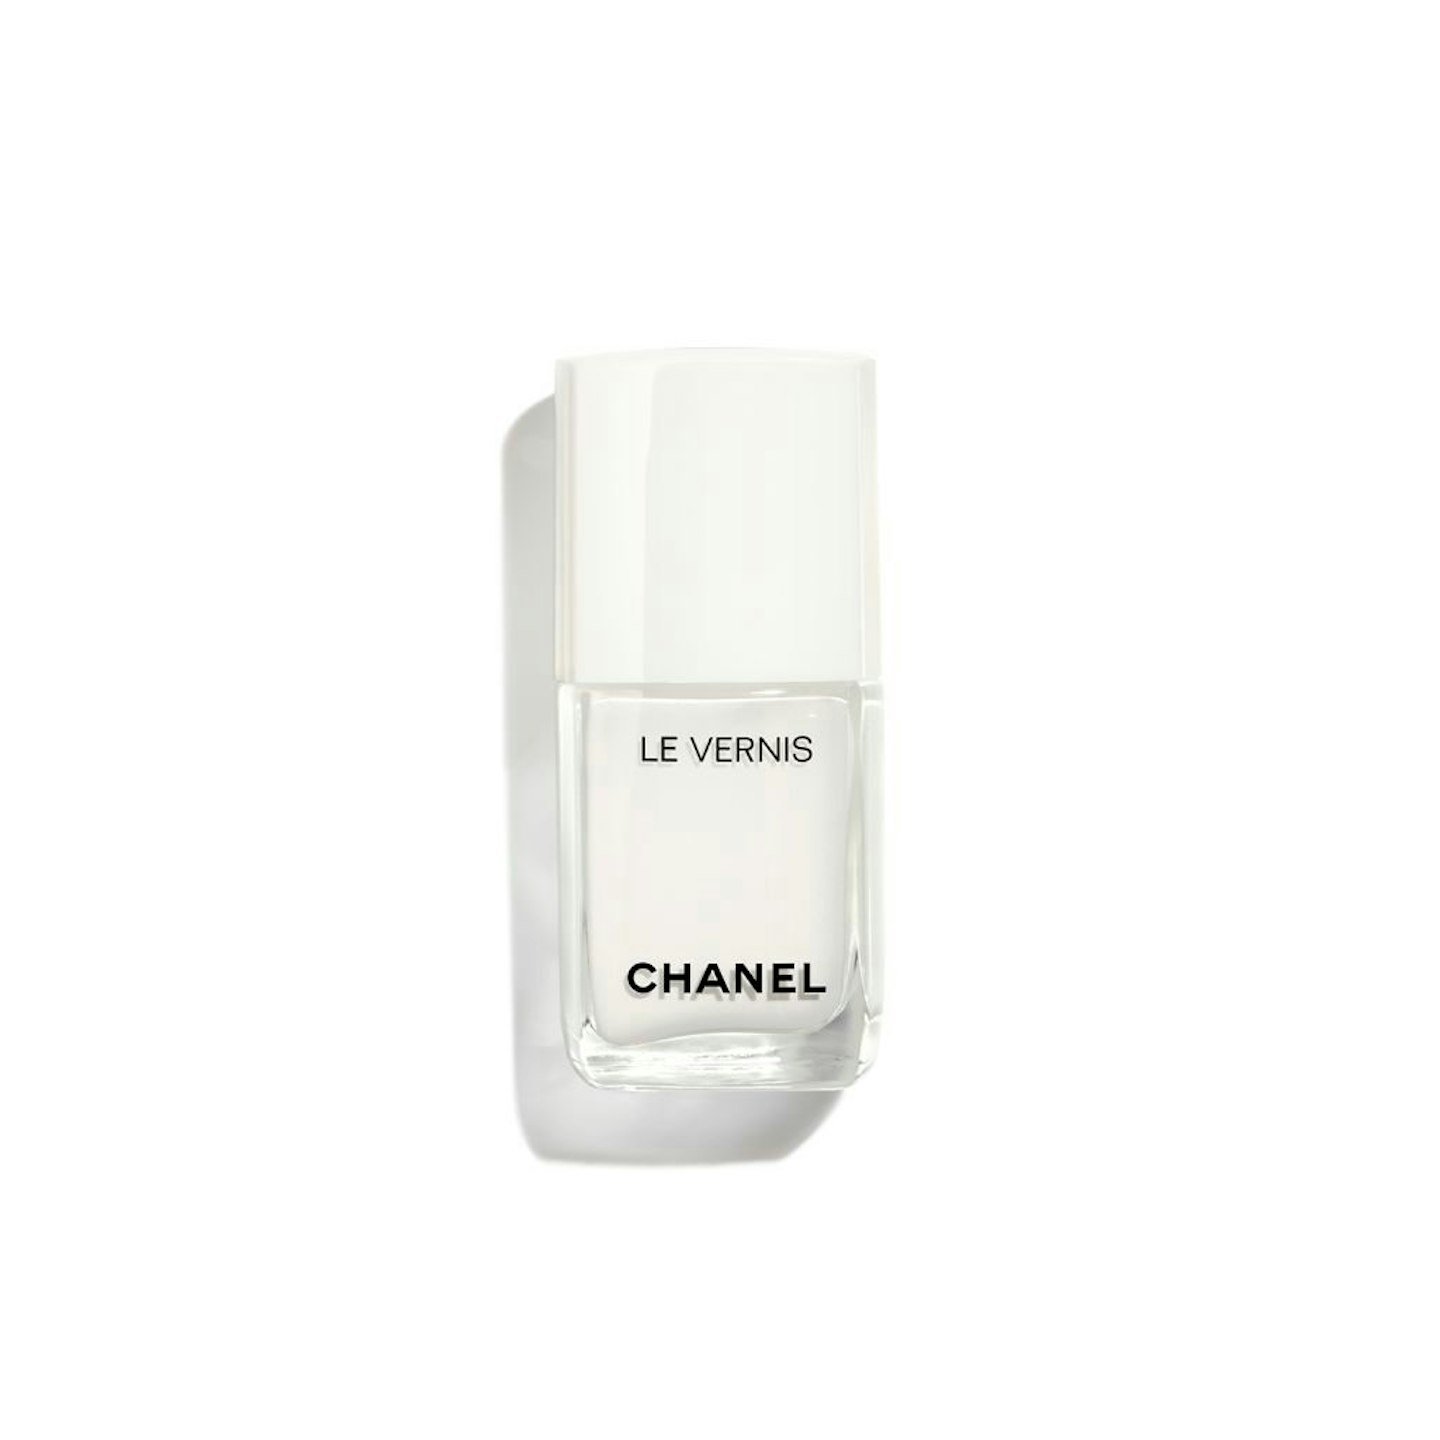 Le Vernis Limited Edition Longwear Nail Colour in Pure White, £22